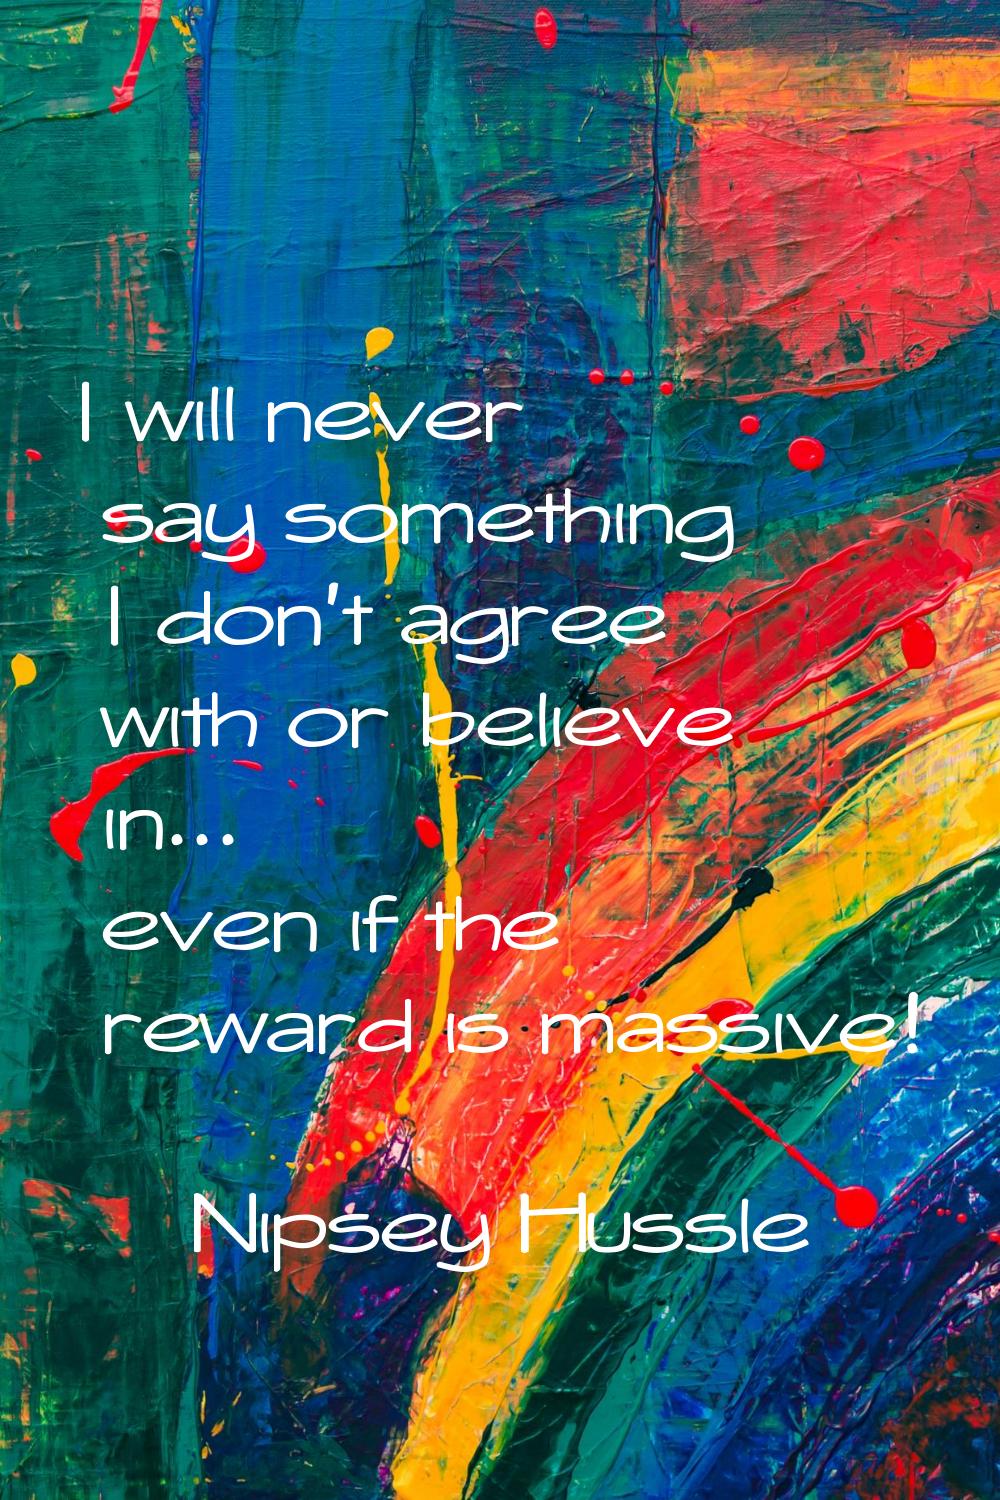 I will never say something I don't agree with or believe in... even if the reward is massive!